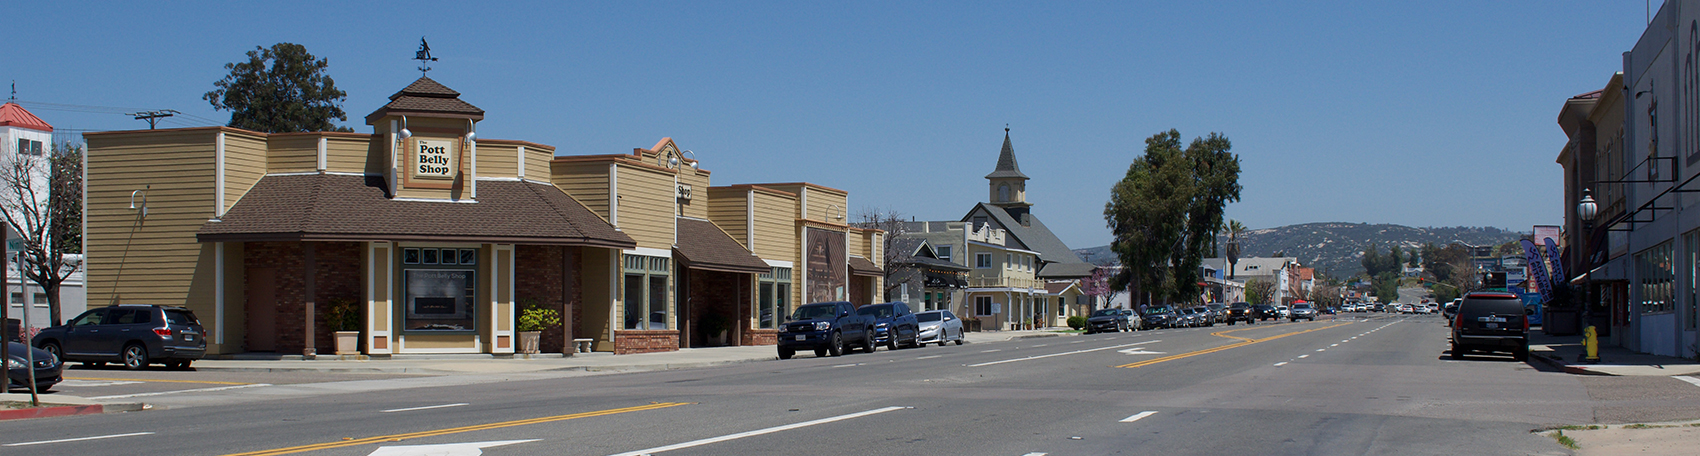 Exterior photo, local street with small businesses